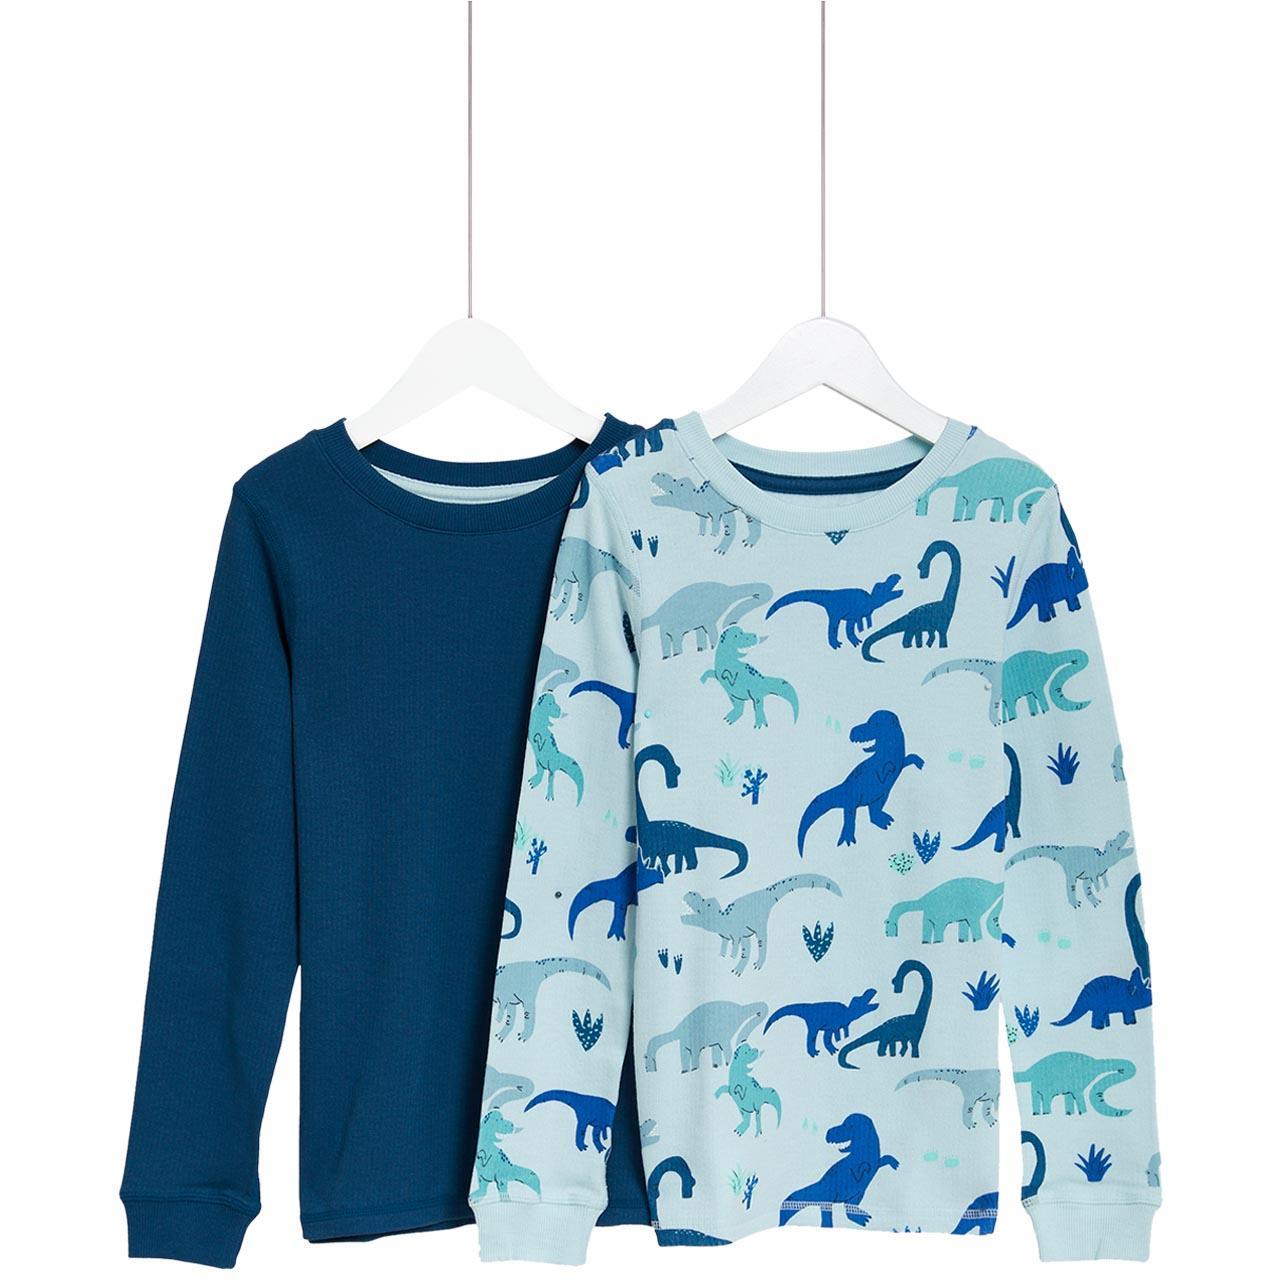 M&S Cloud Thermal Tops, 2 Pack, 3-4 Years, Lilac